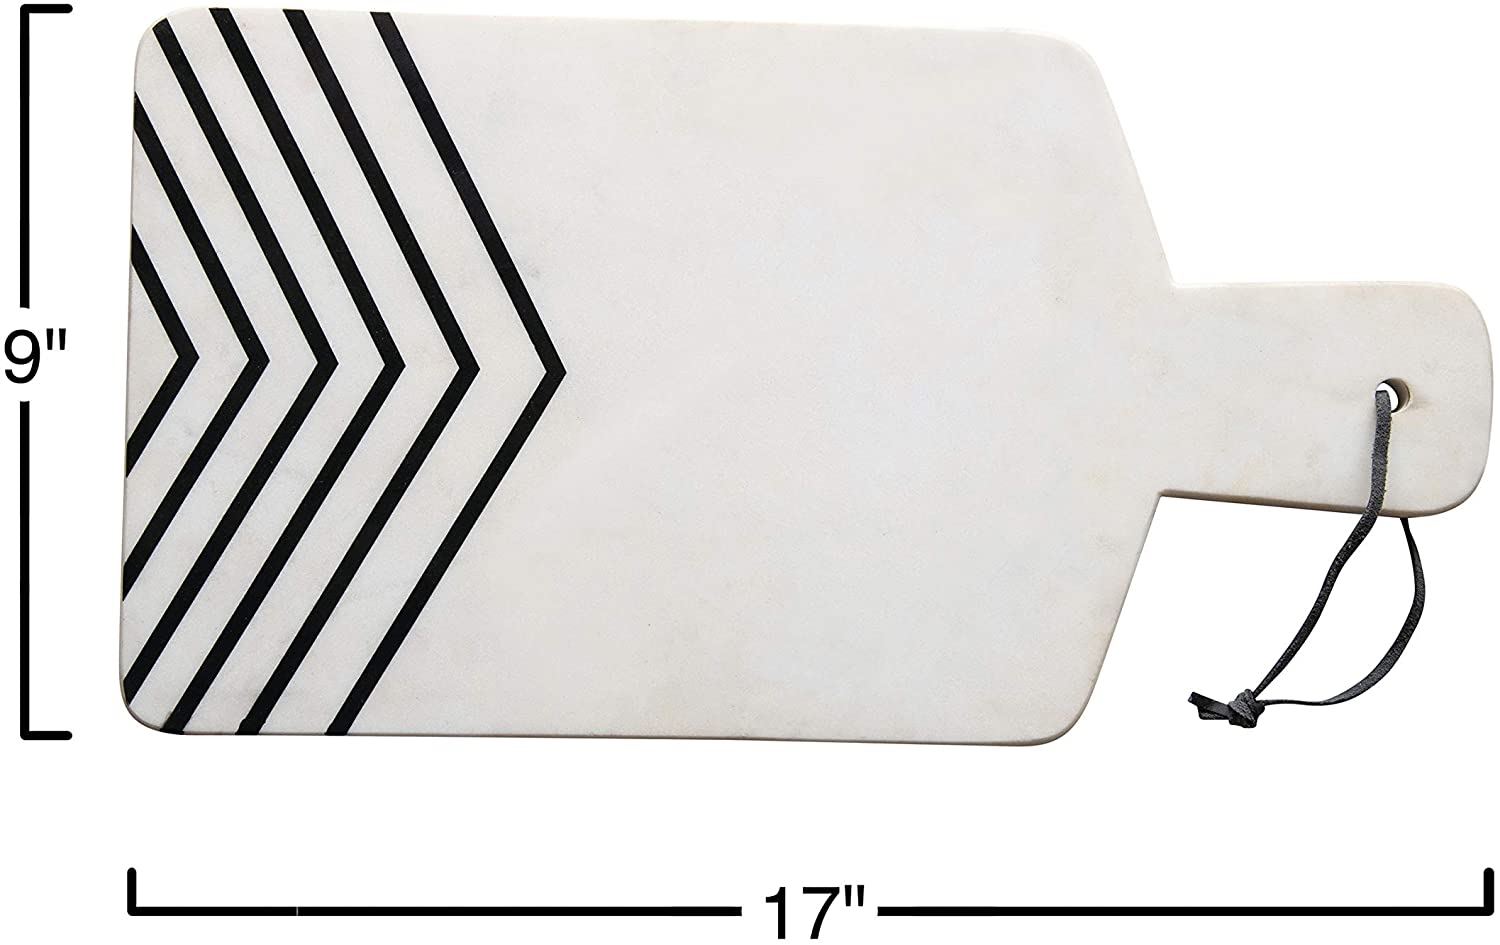 White and Black Chevron Marble Cheese/Cutting Board - Image 2